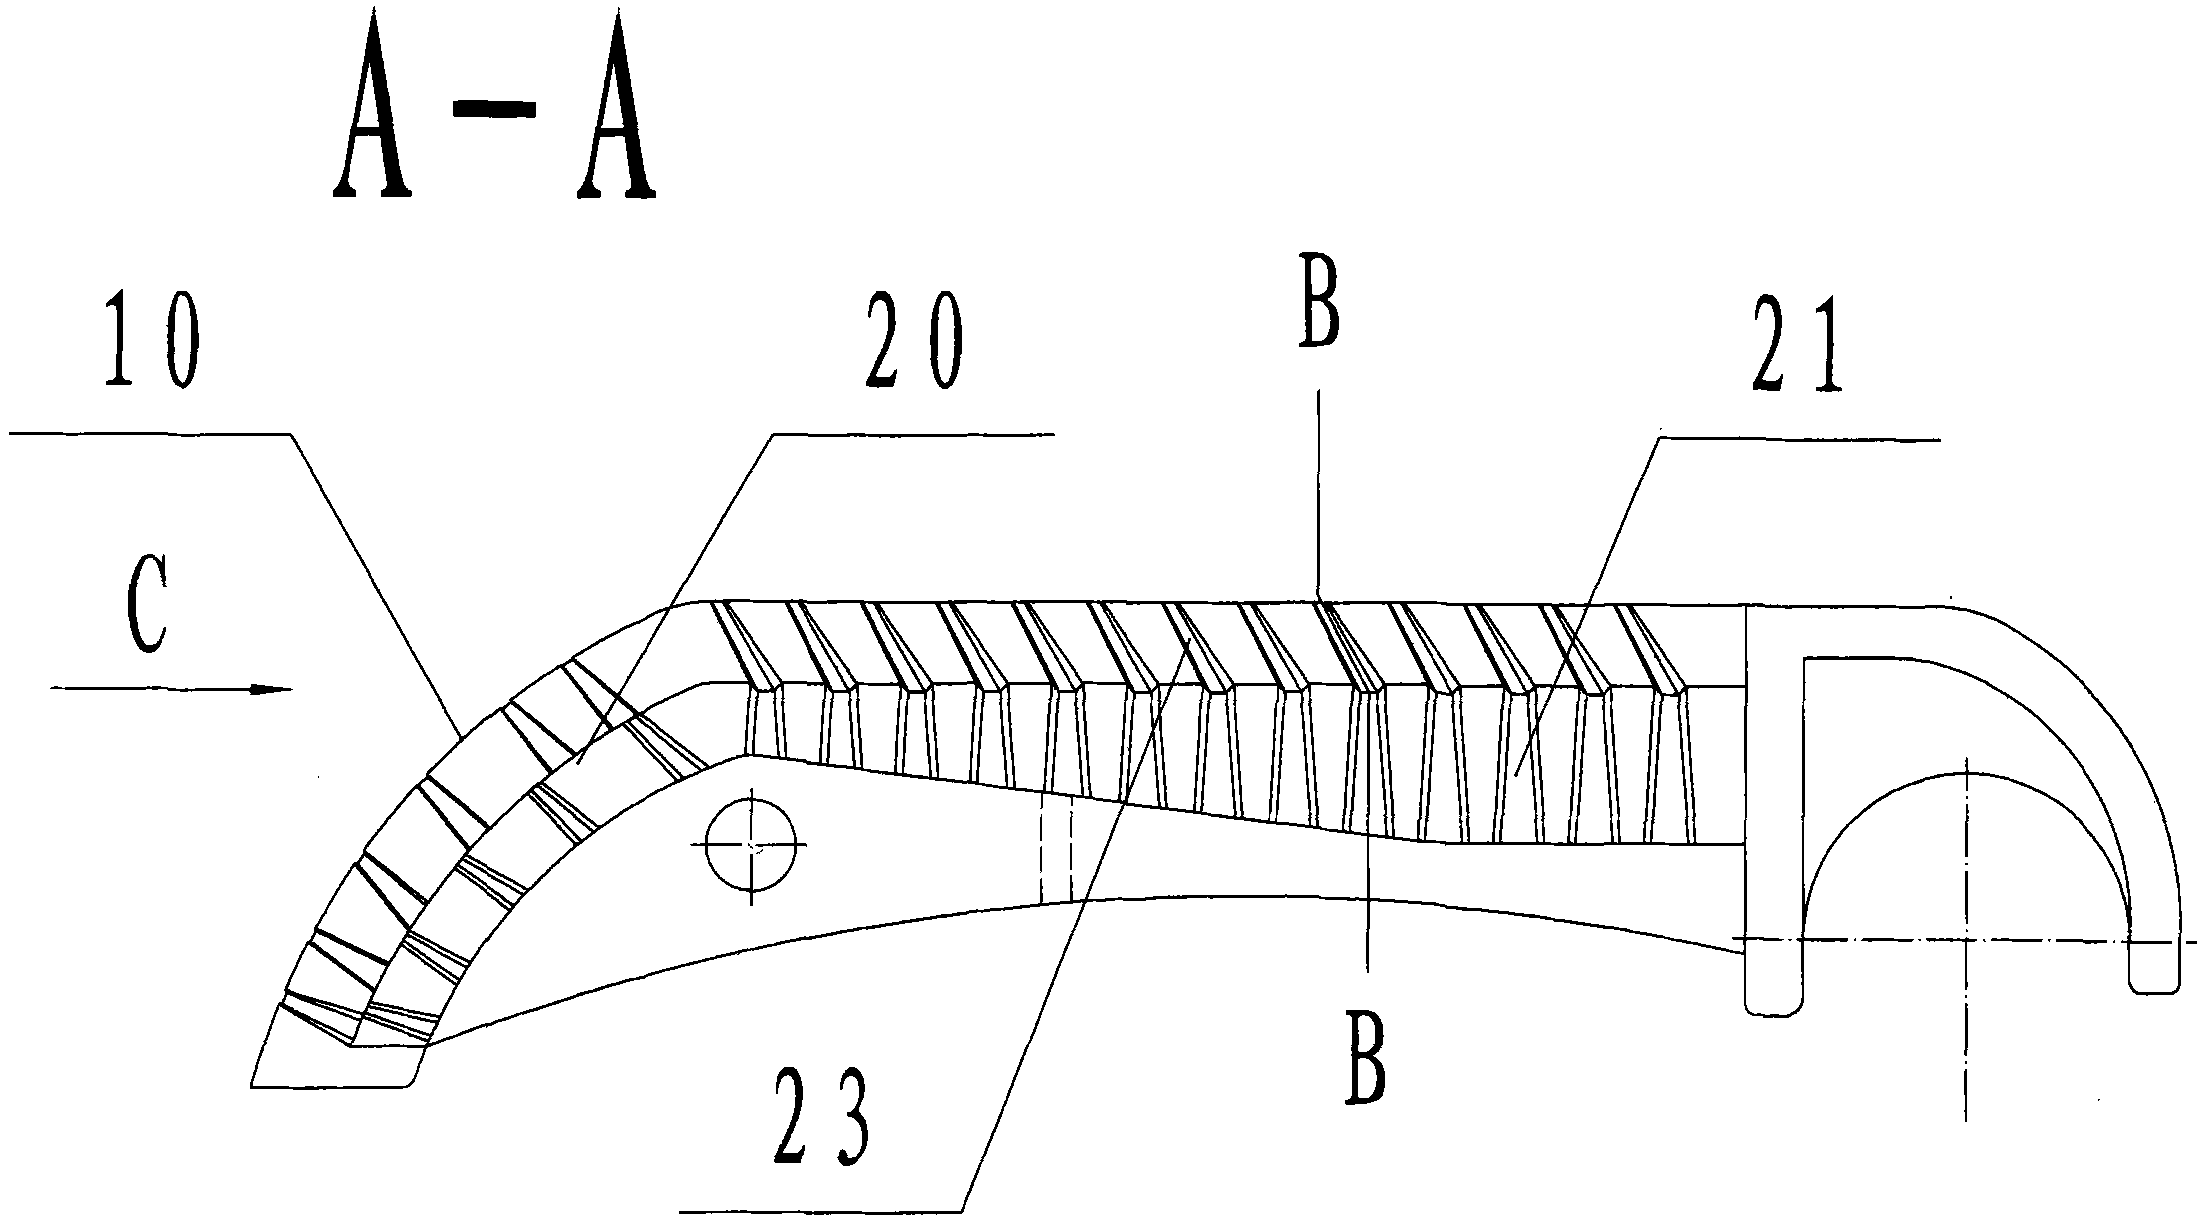 Non-coal leaking front air-outlet reciprocating grate segment for large suspension-type reciprocating grate